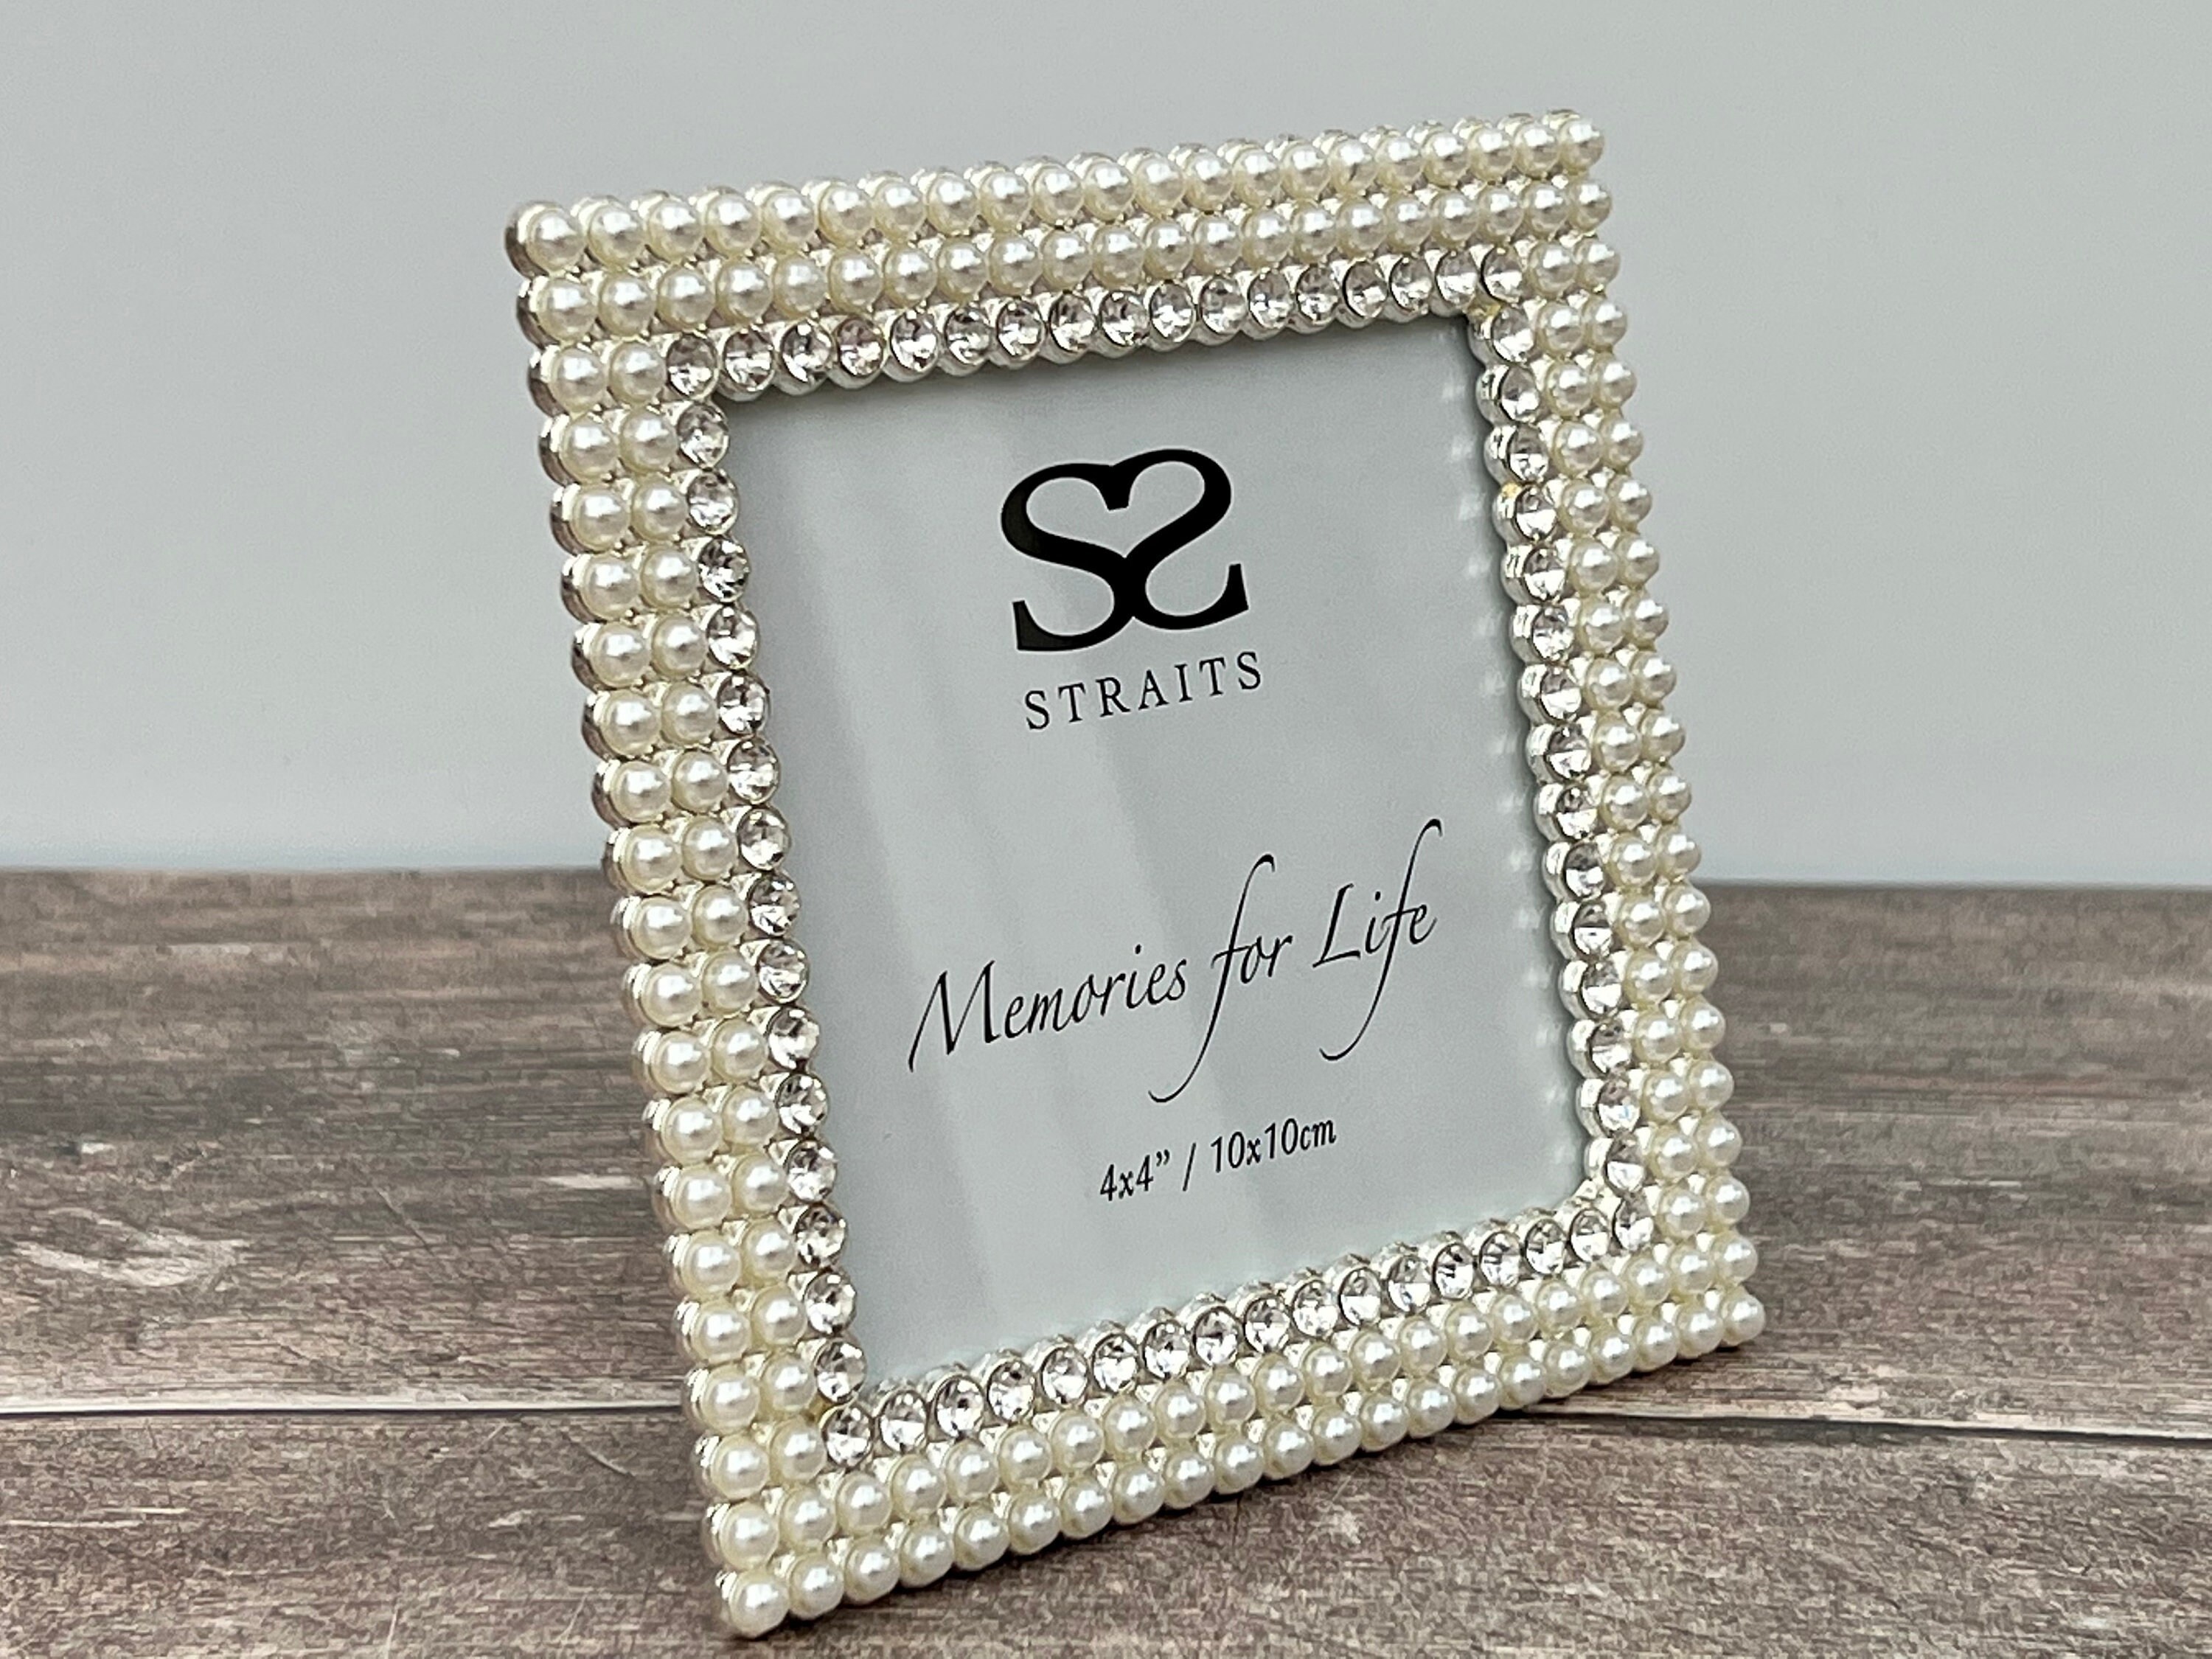 Special Moments Memories Collection Gold Glitter Square Photo Frames, 4x4  in.